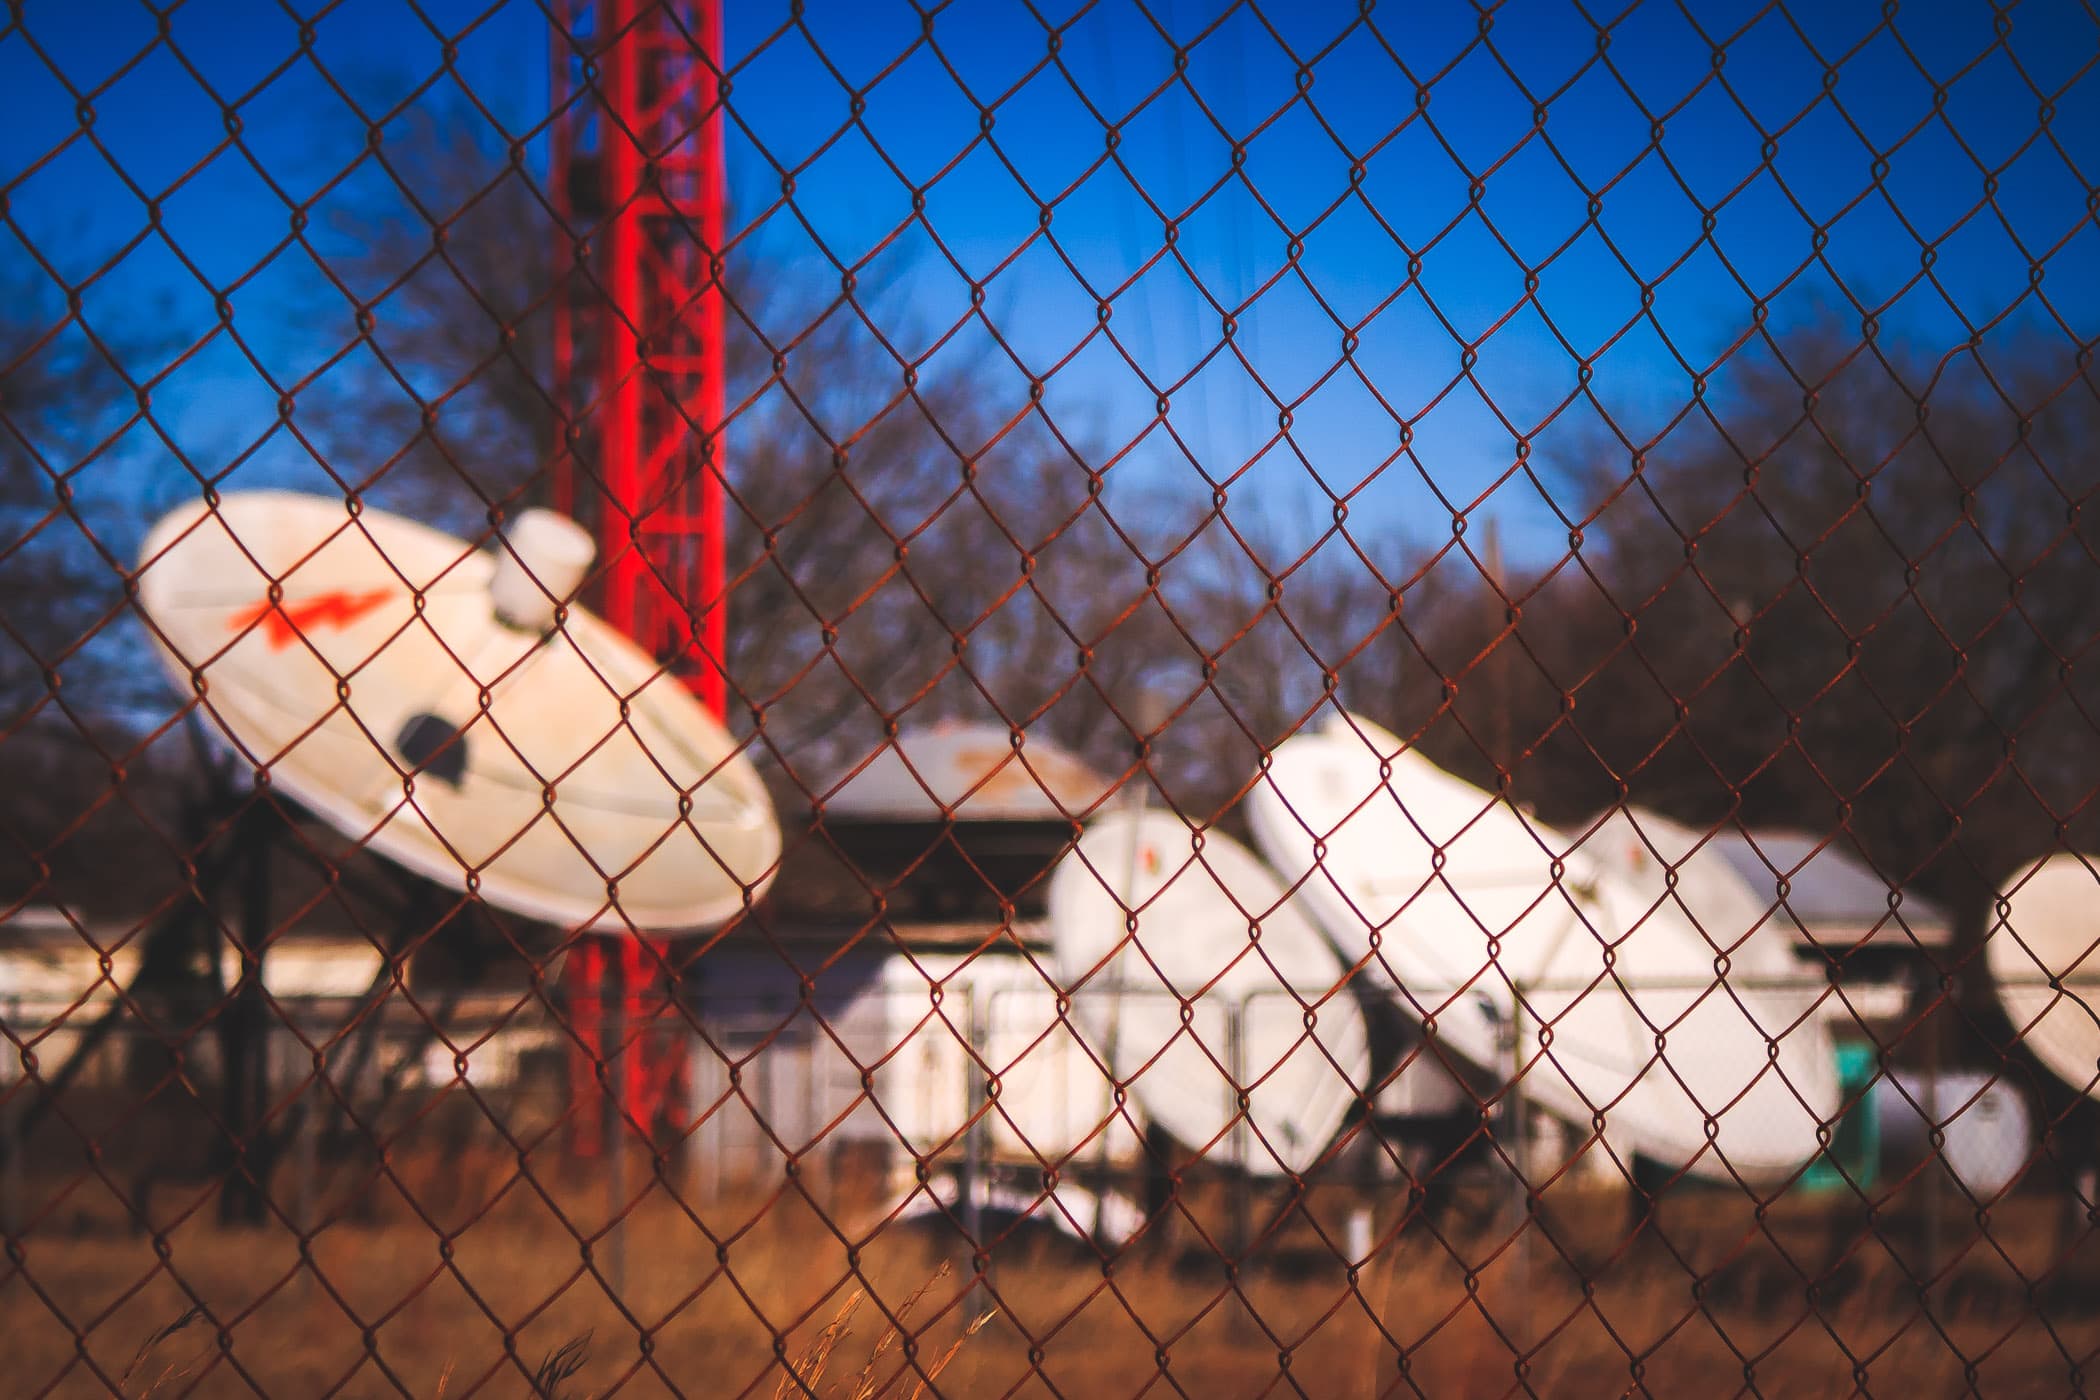 KLTV's uplink and downlink facility in Tyler, Texas.